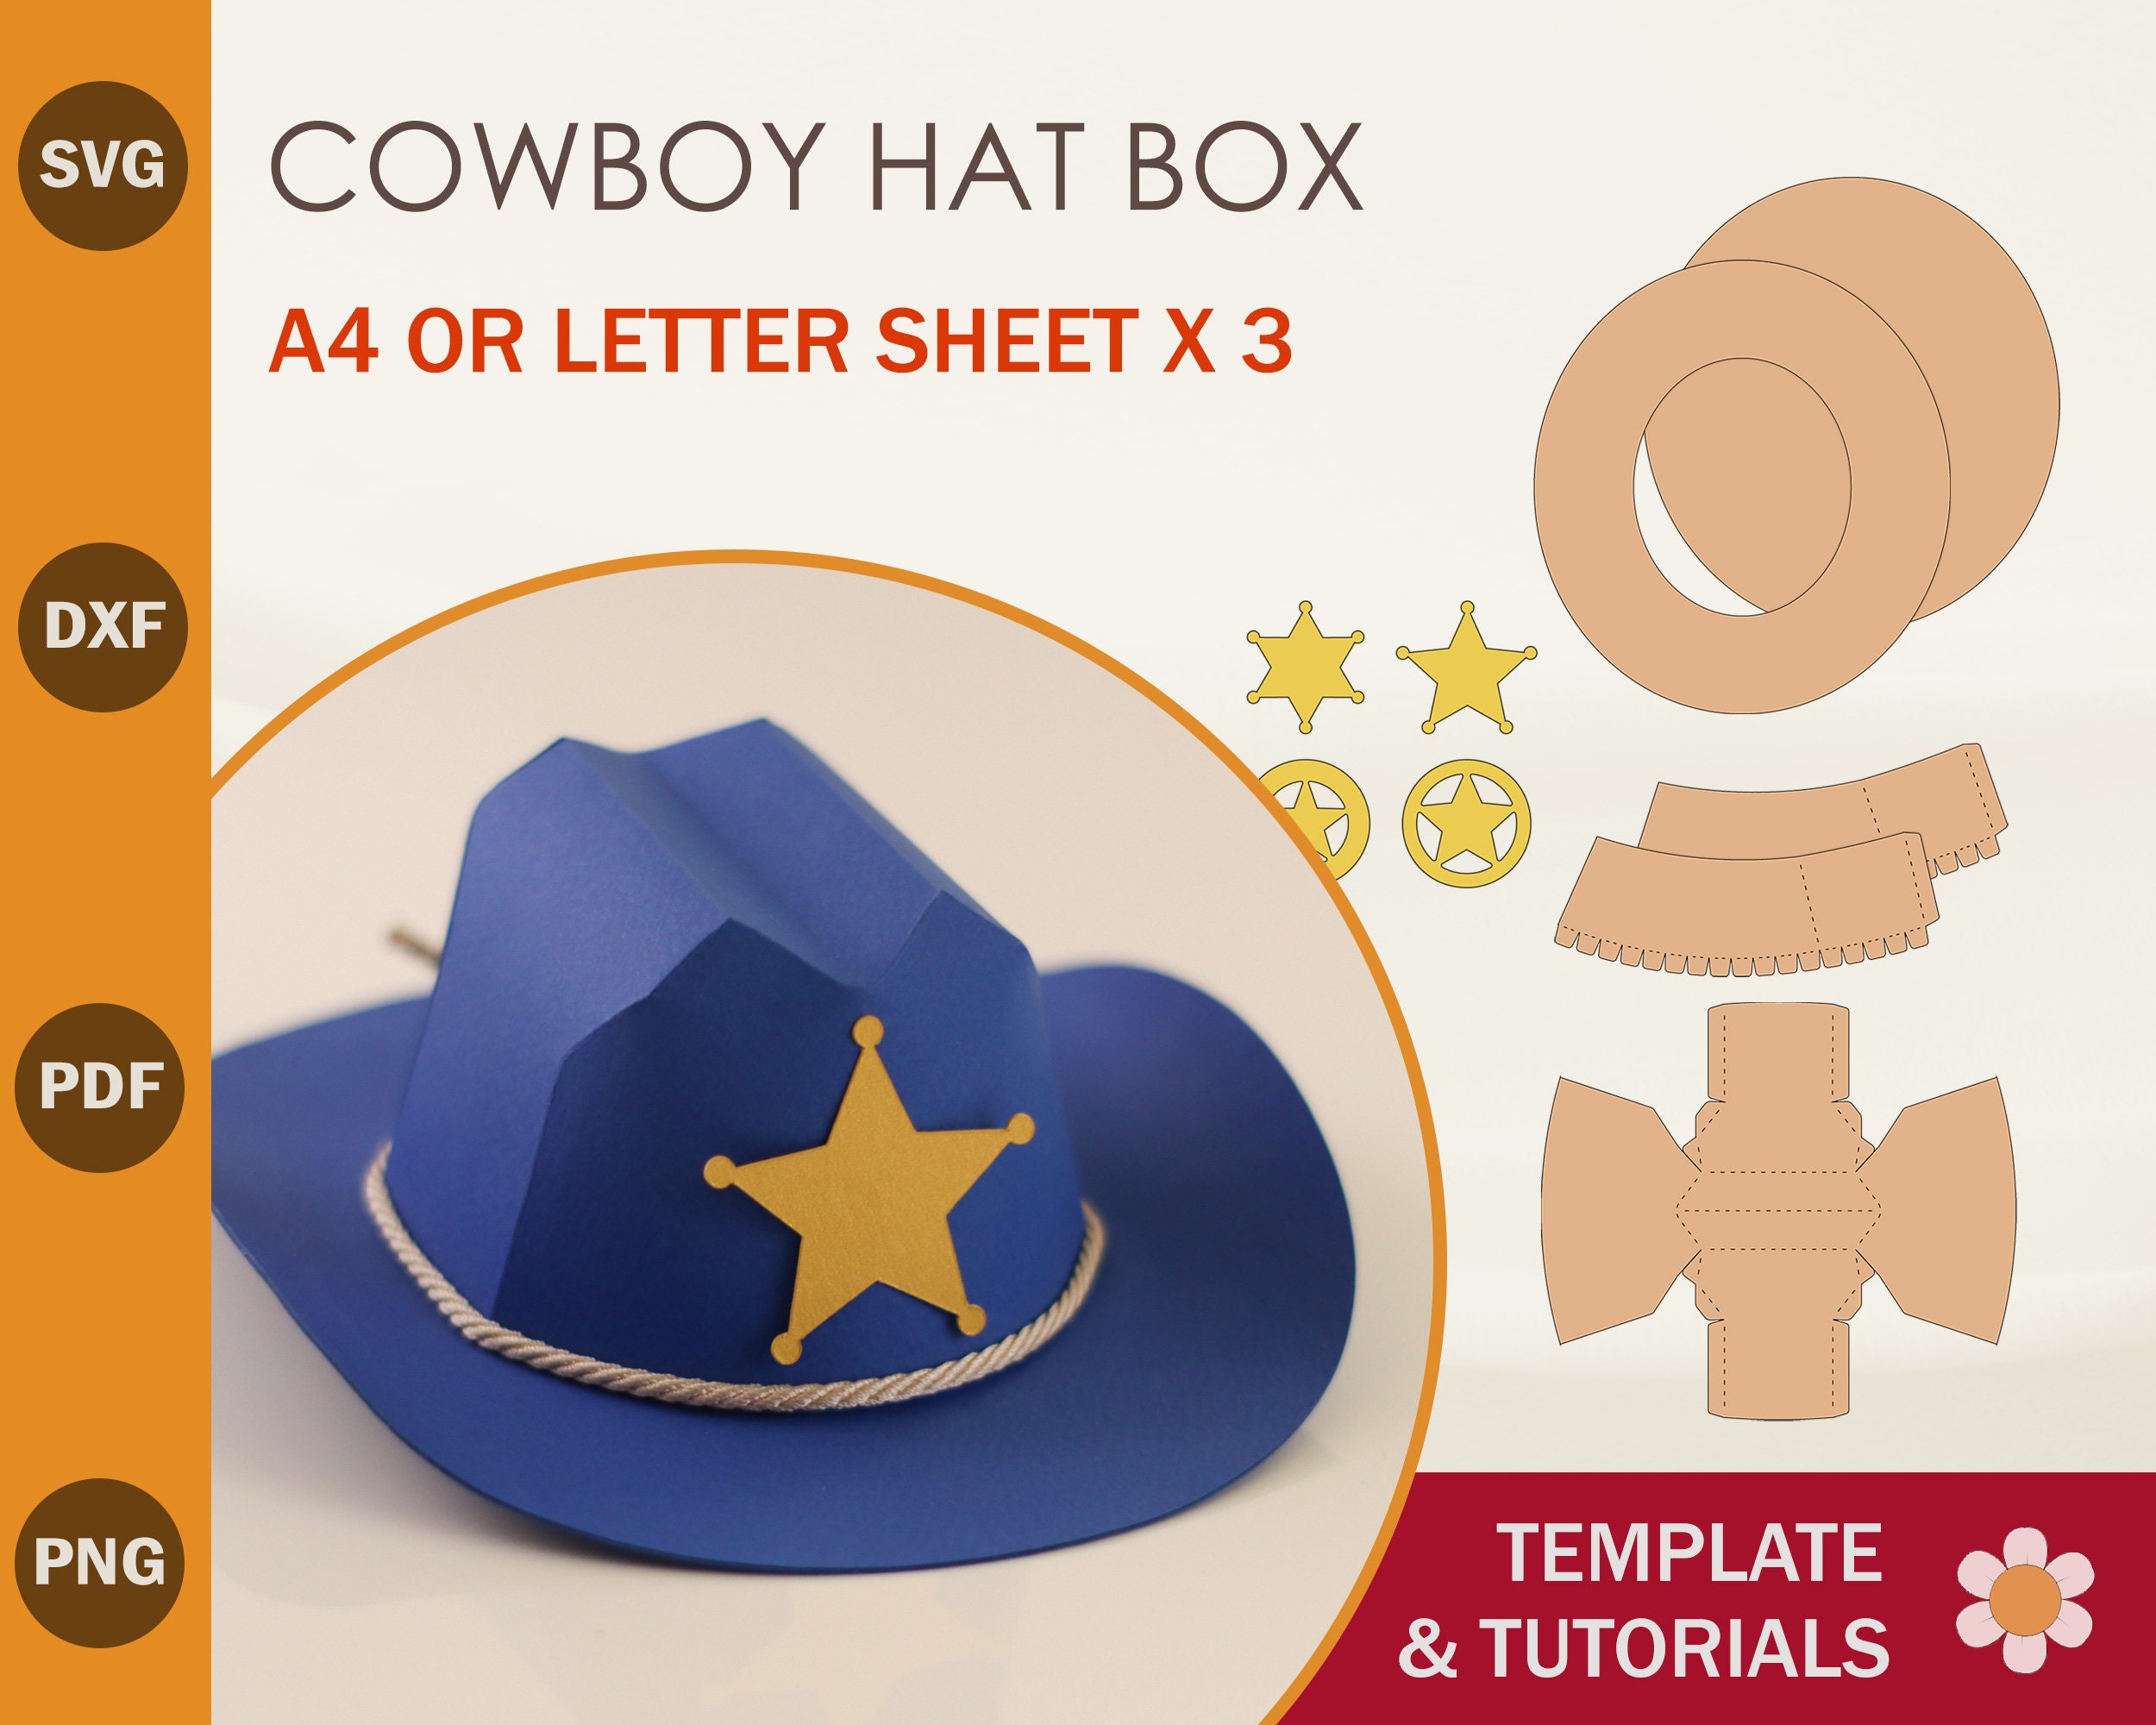 Template of Box for Round Hat 6x4x1 